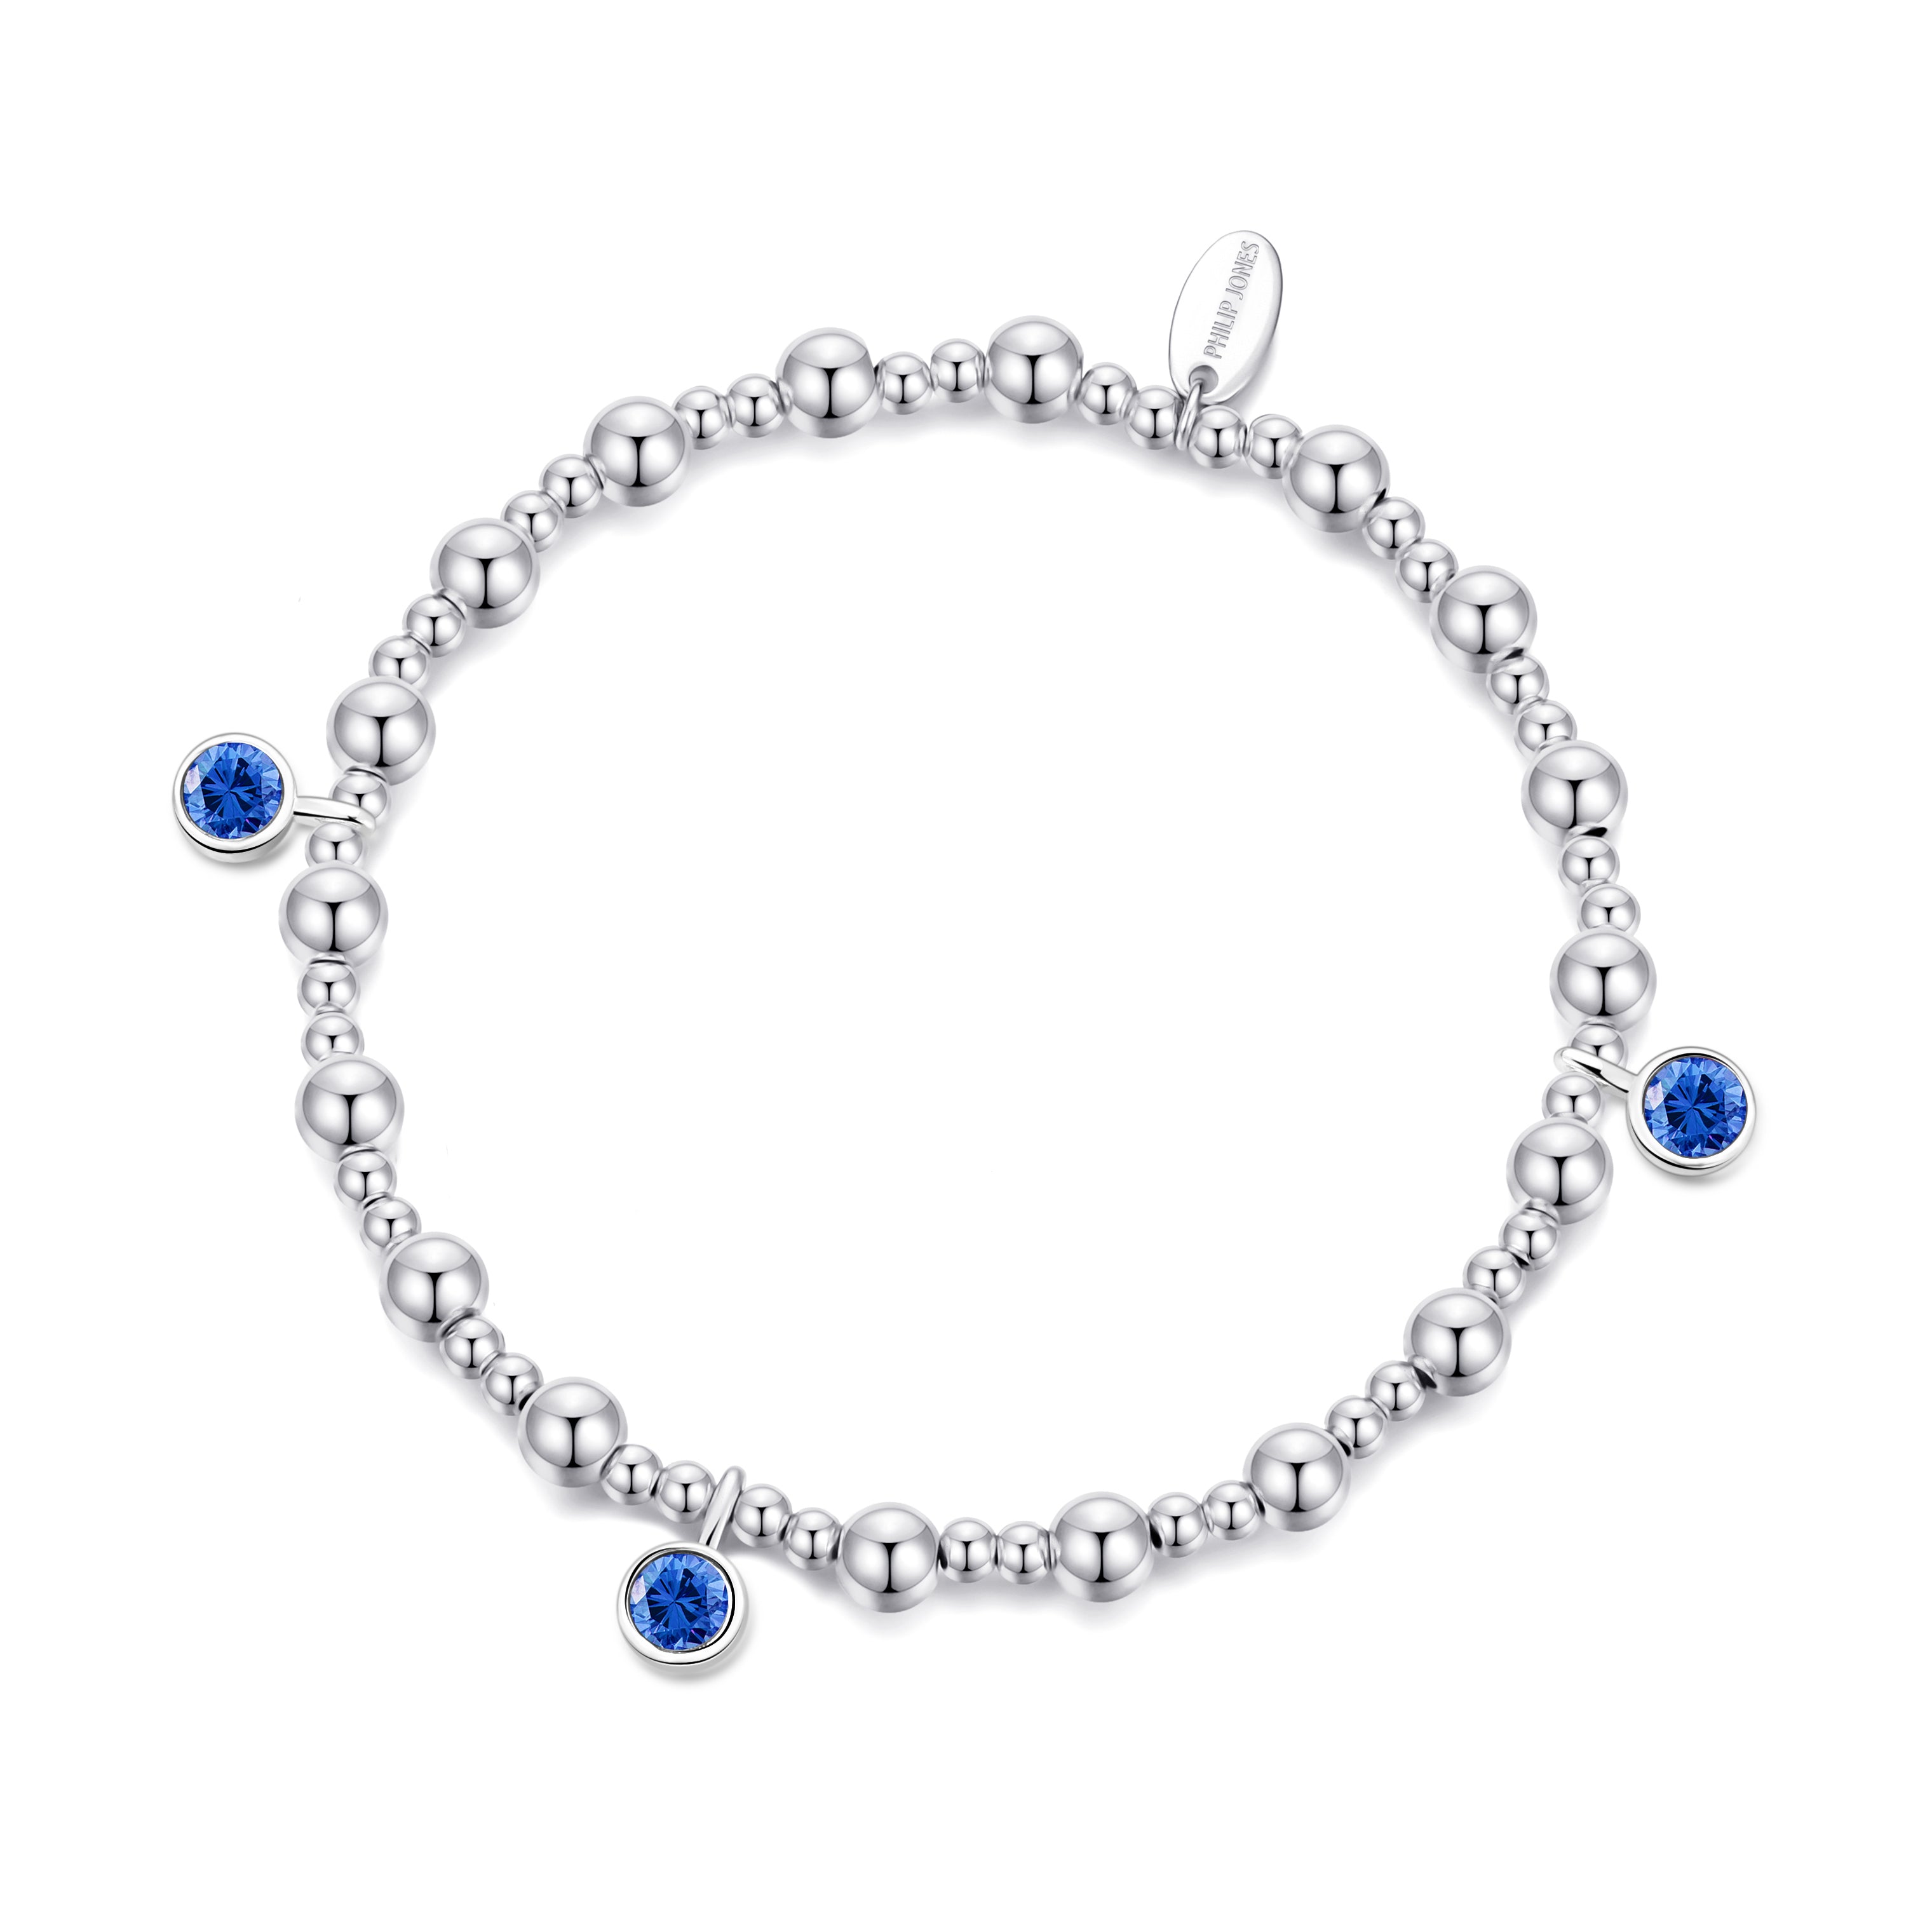 September (Sapphire) Birthstone Stretch Charm Bracelet with Quote Gift Box